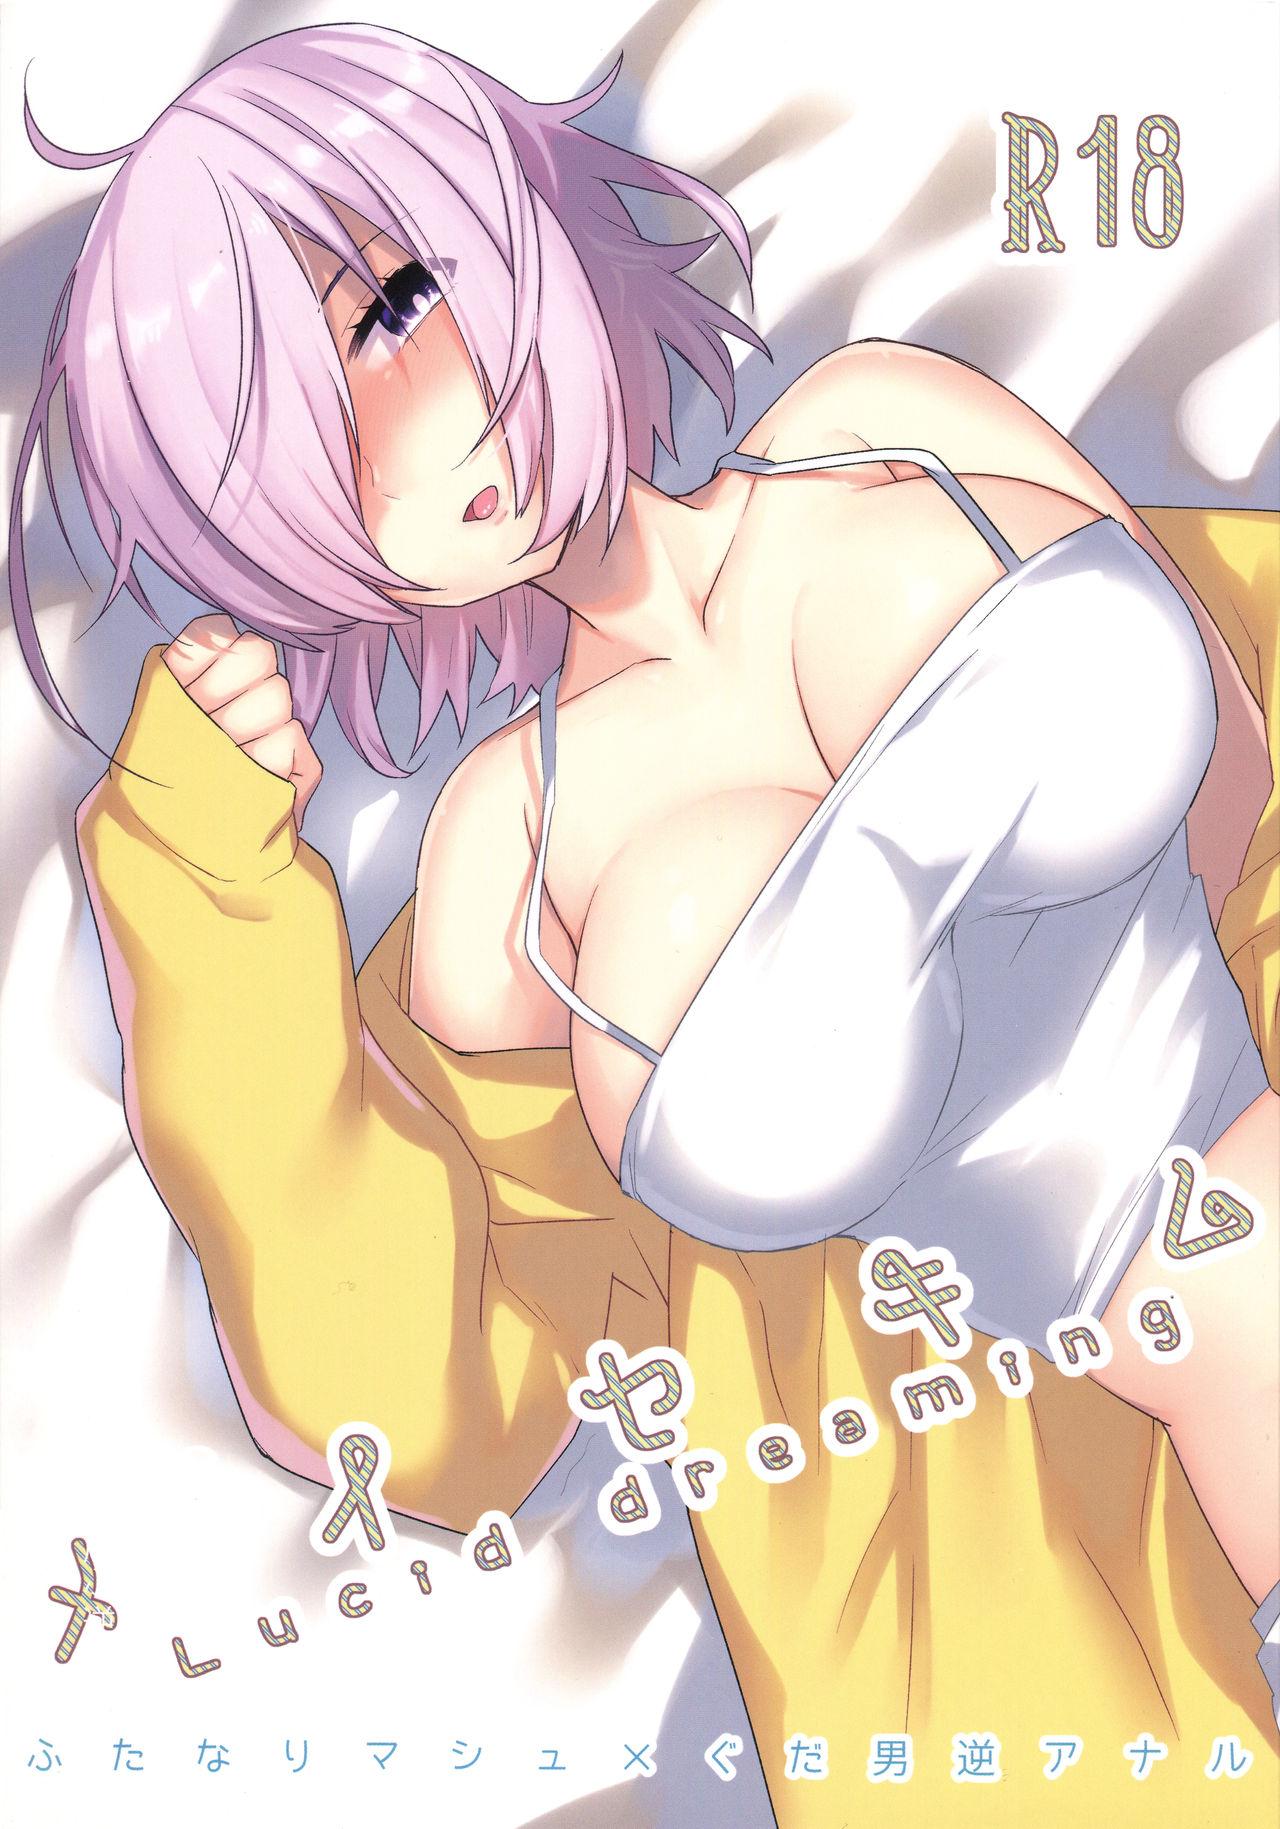 Indonesian Meisekimu - Fate grand order Blowjob - Page 1